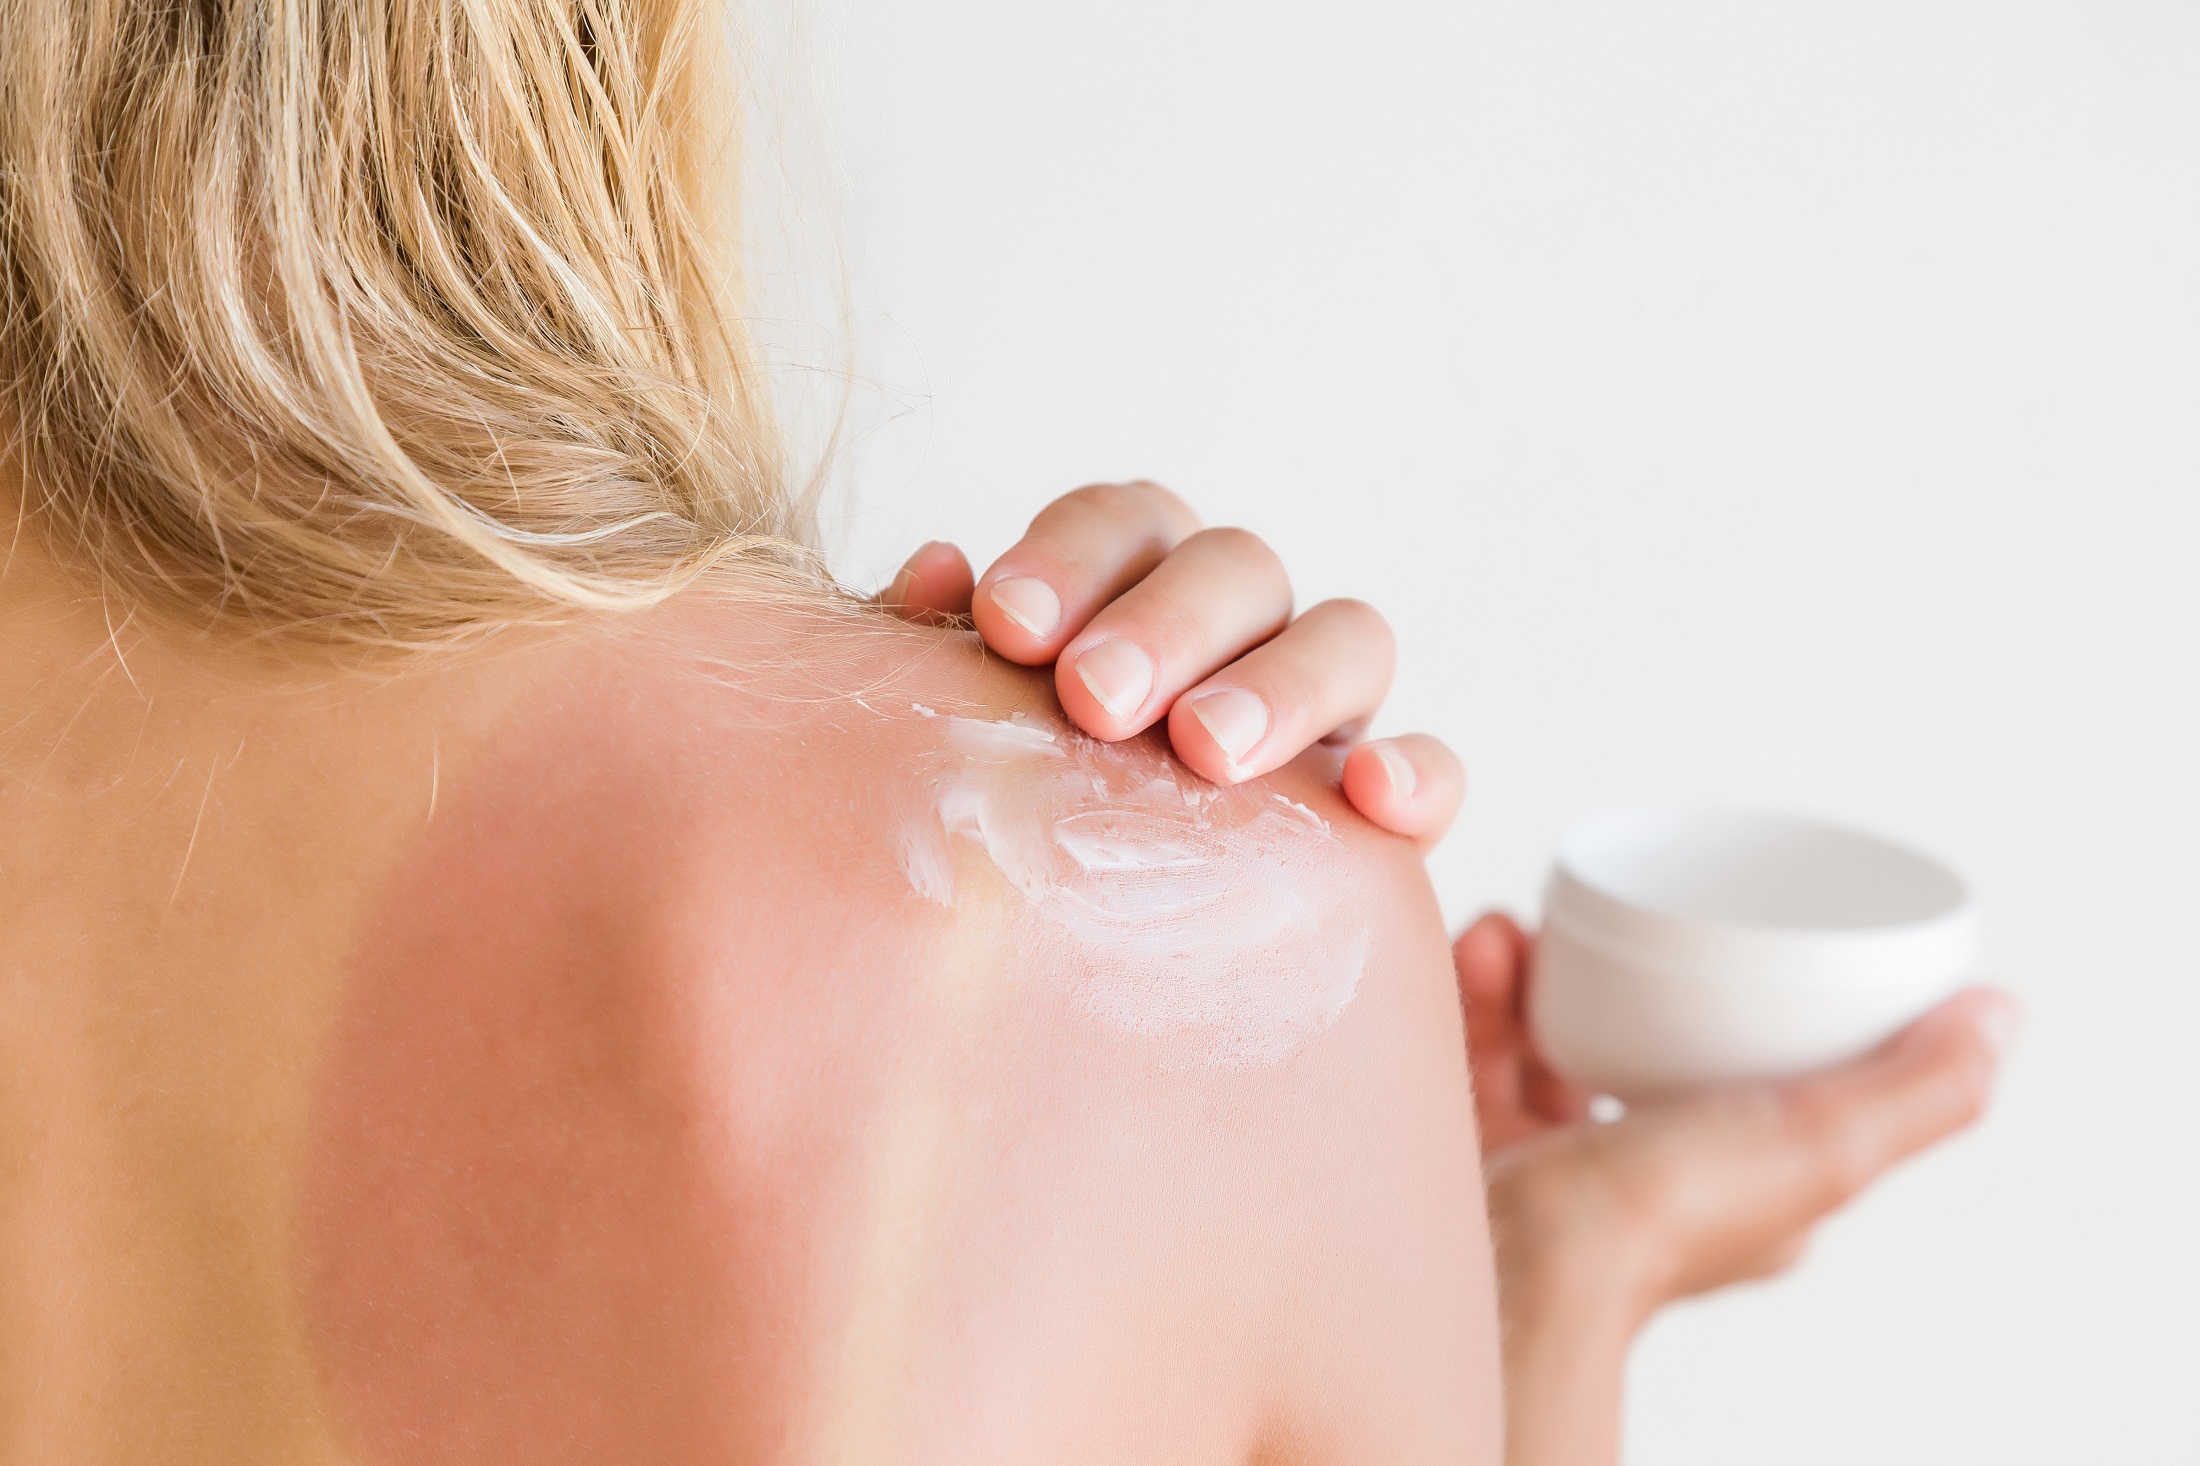 10 home remedies for sunburns that provide instant relief